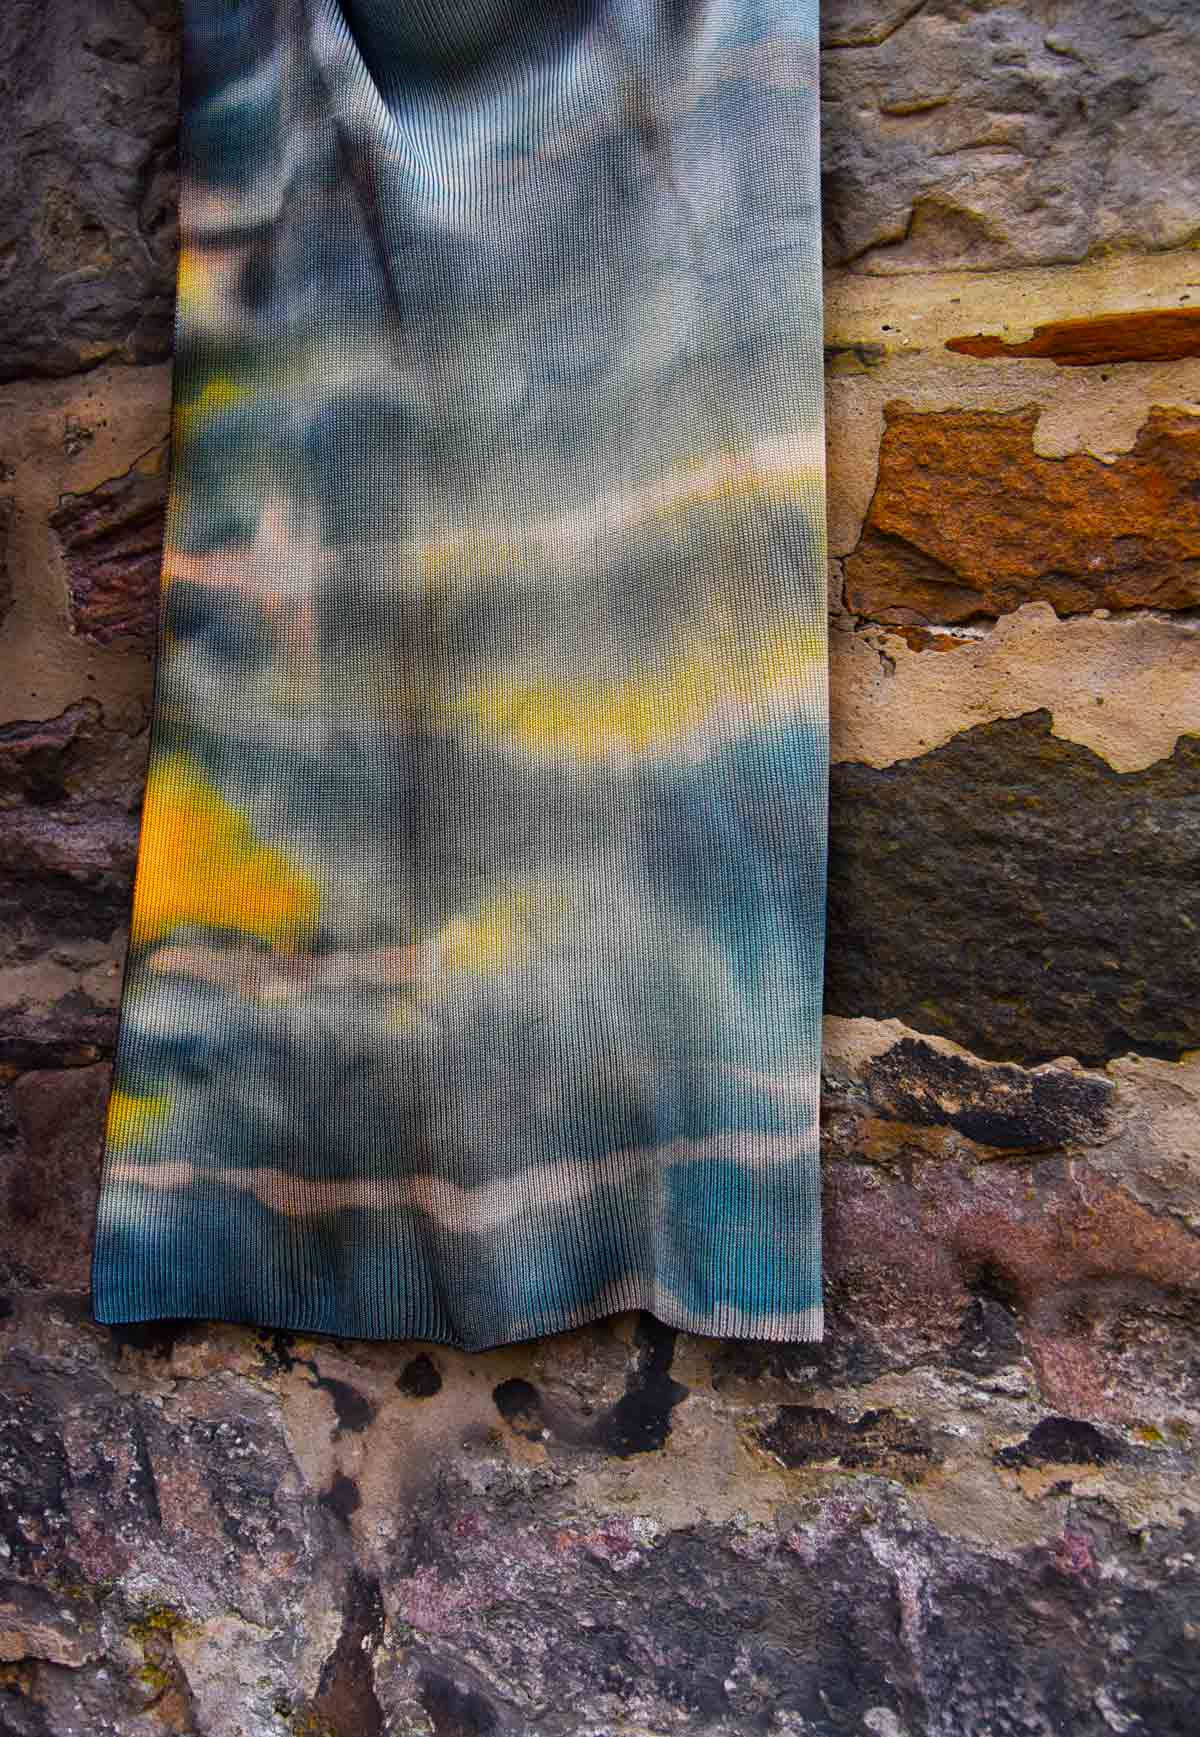 Dyed Knitted Textiles